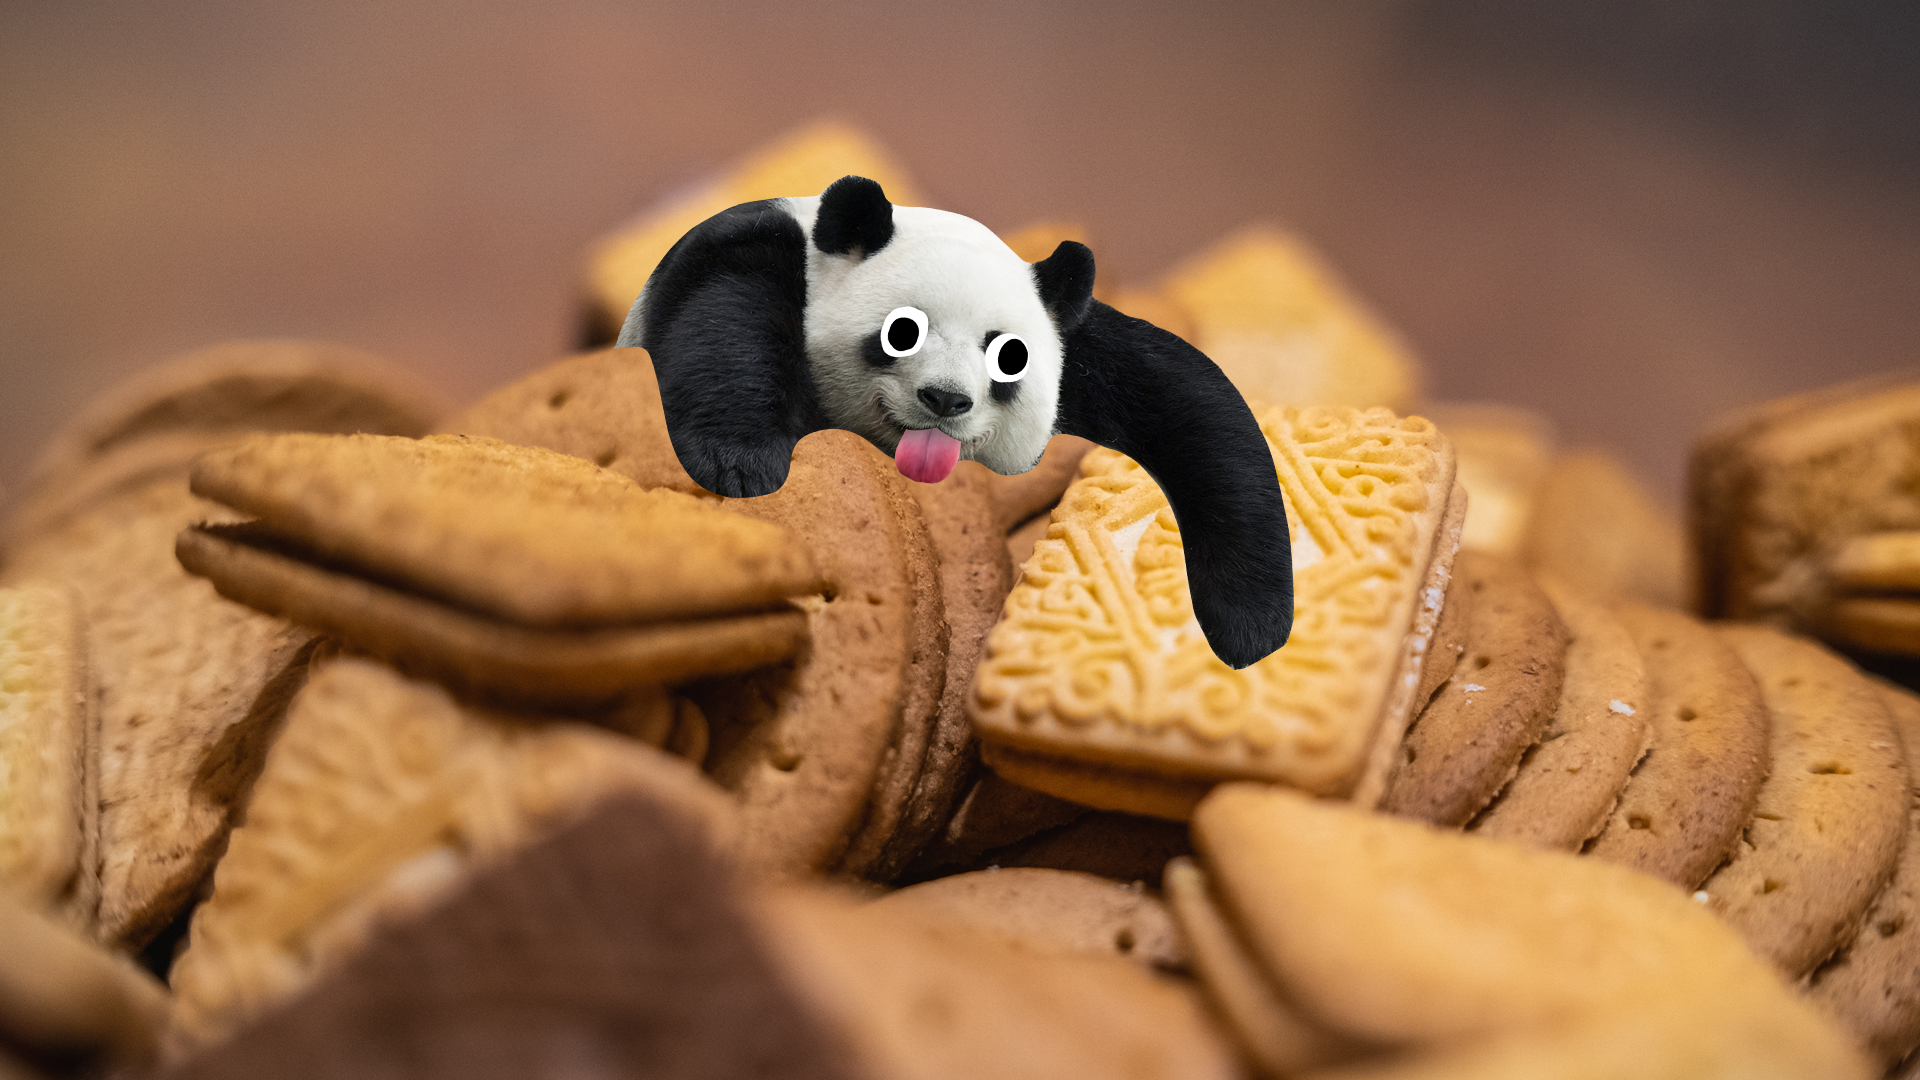 Pile of biscuits and derpy panda